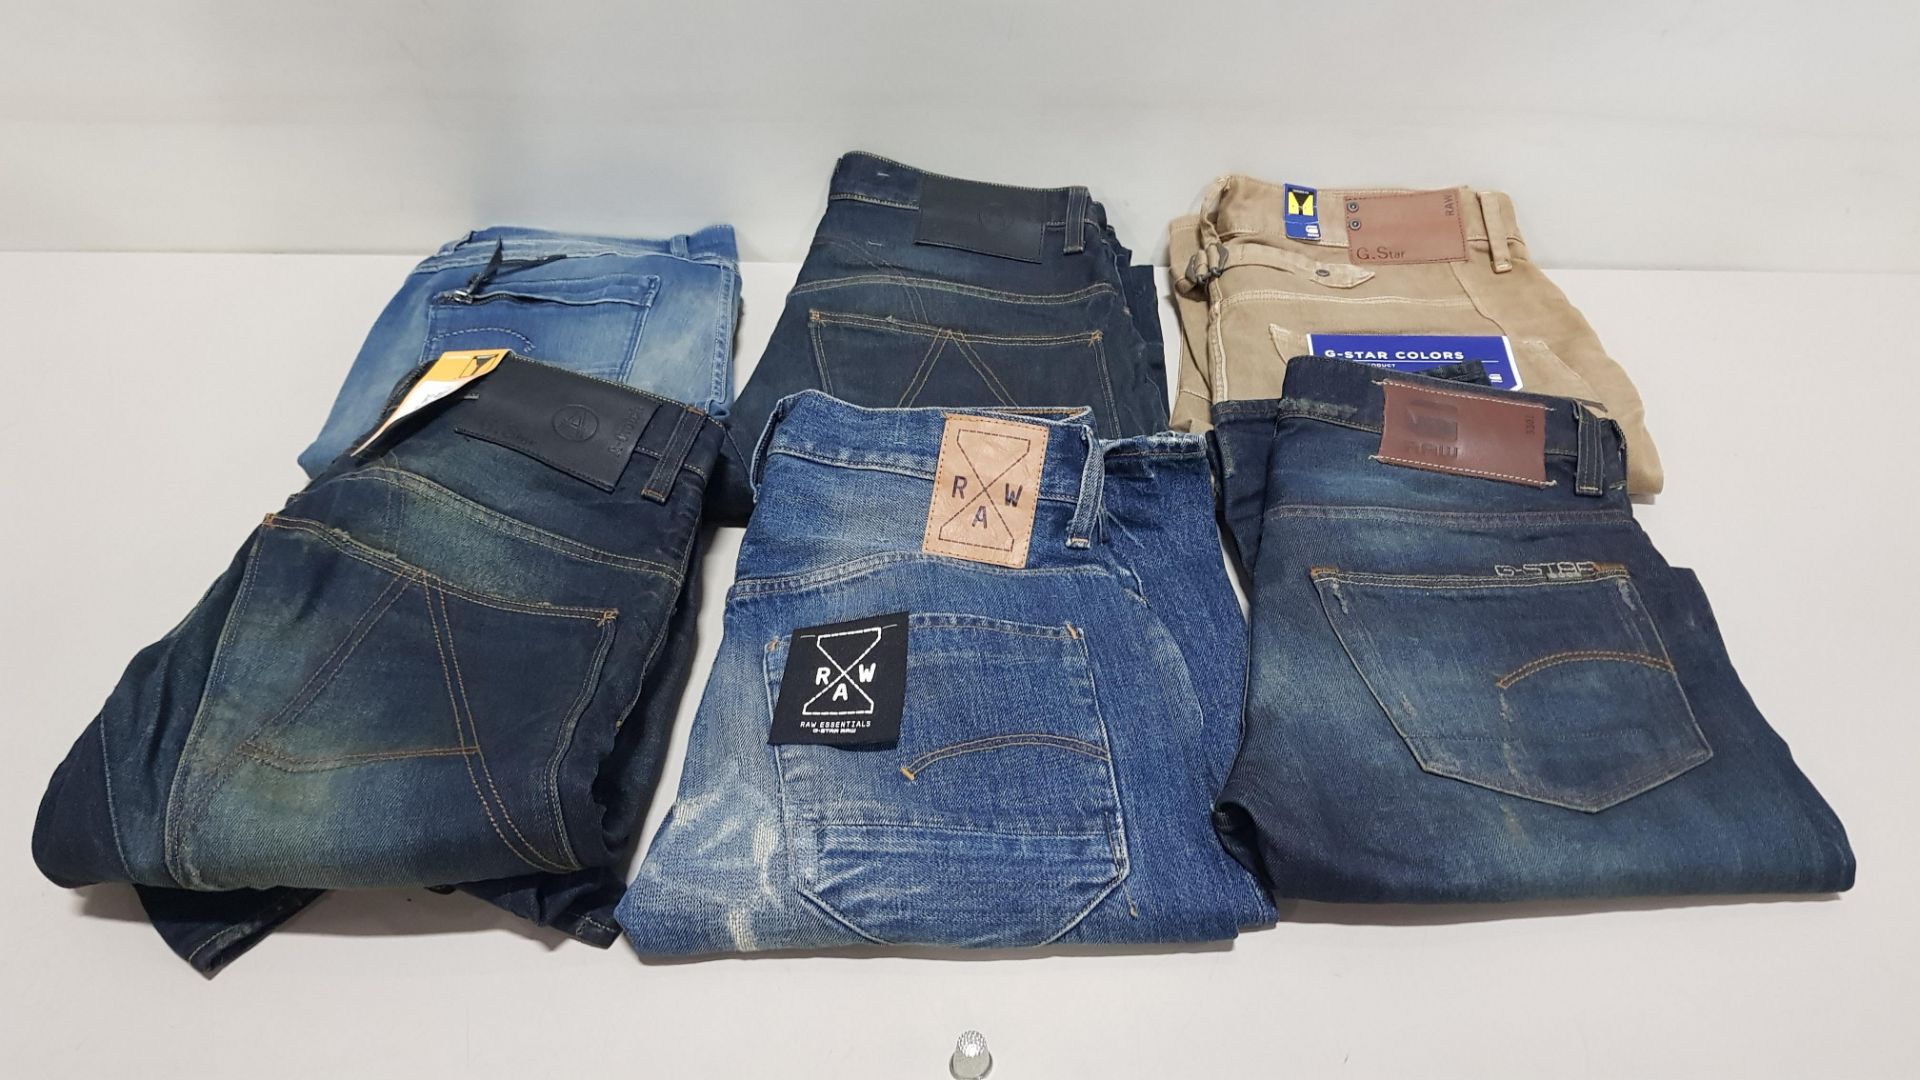 6 X PAIRS OF BRAND NEW G-STAR RAW JEANS IN VARIOUS STYLES & COLOURS IE. LIGHT BLUE, DARK BLUE AND